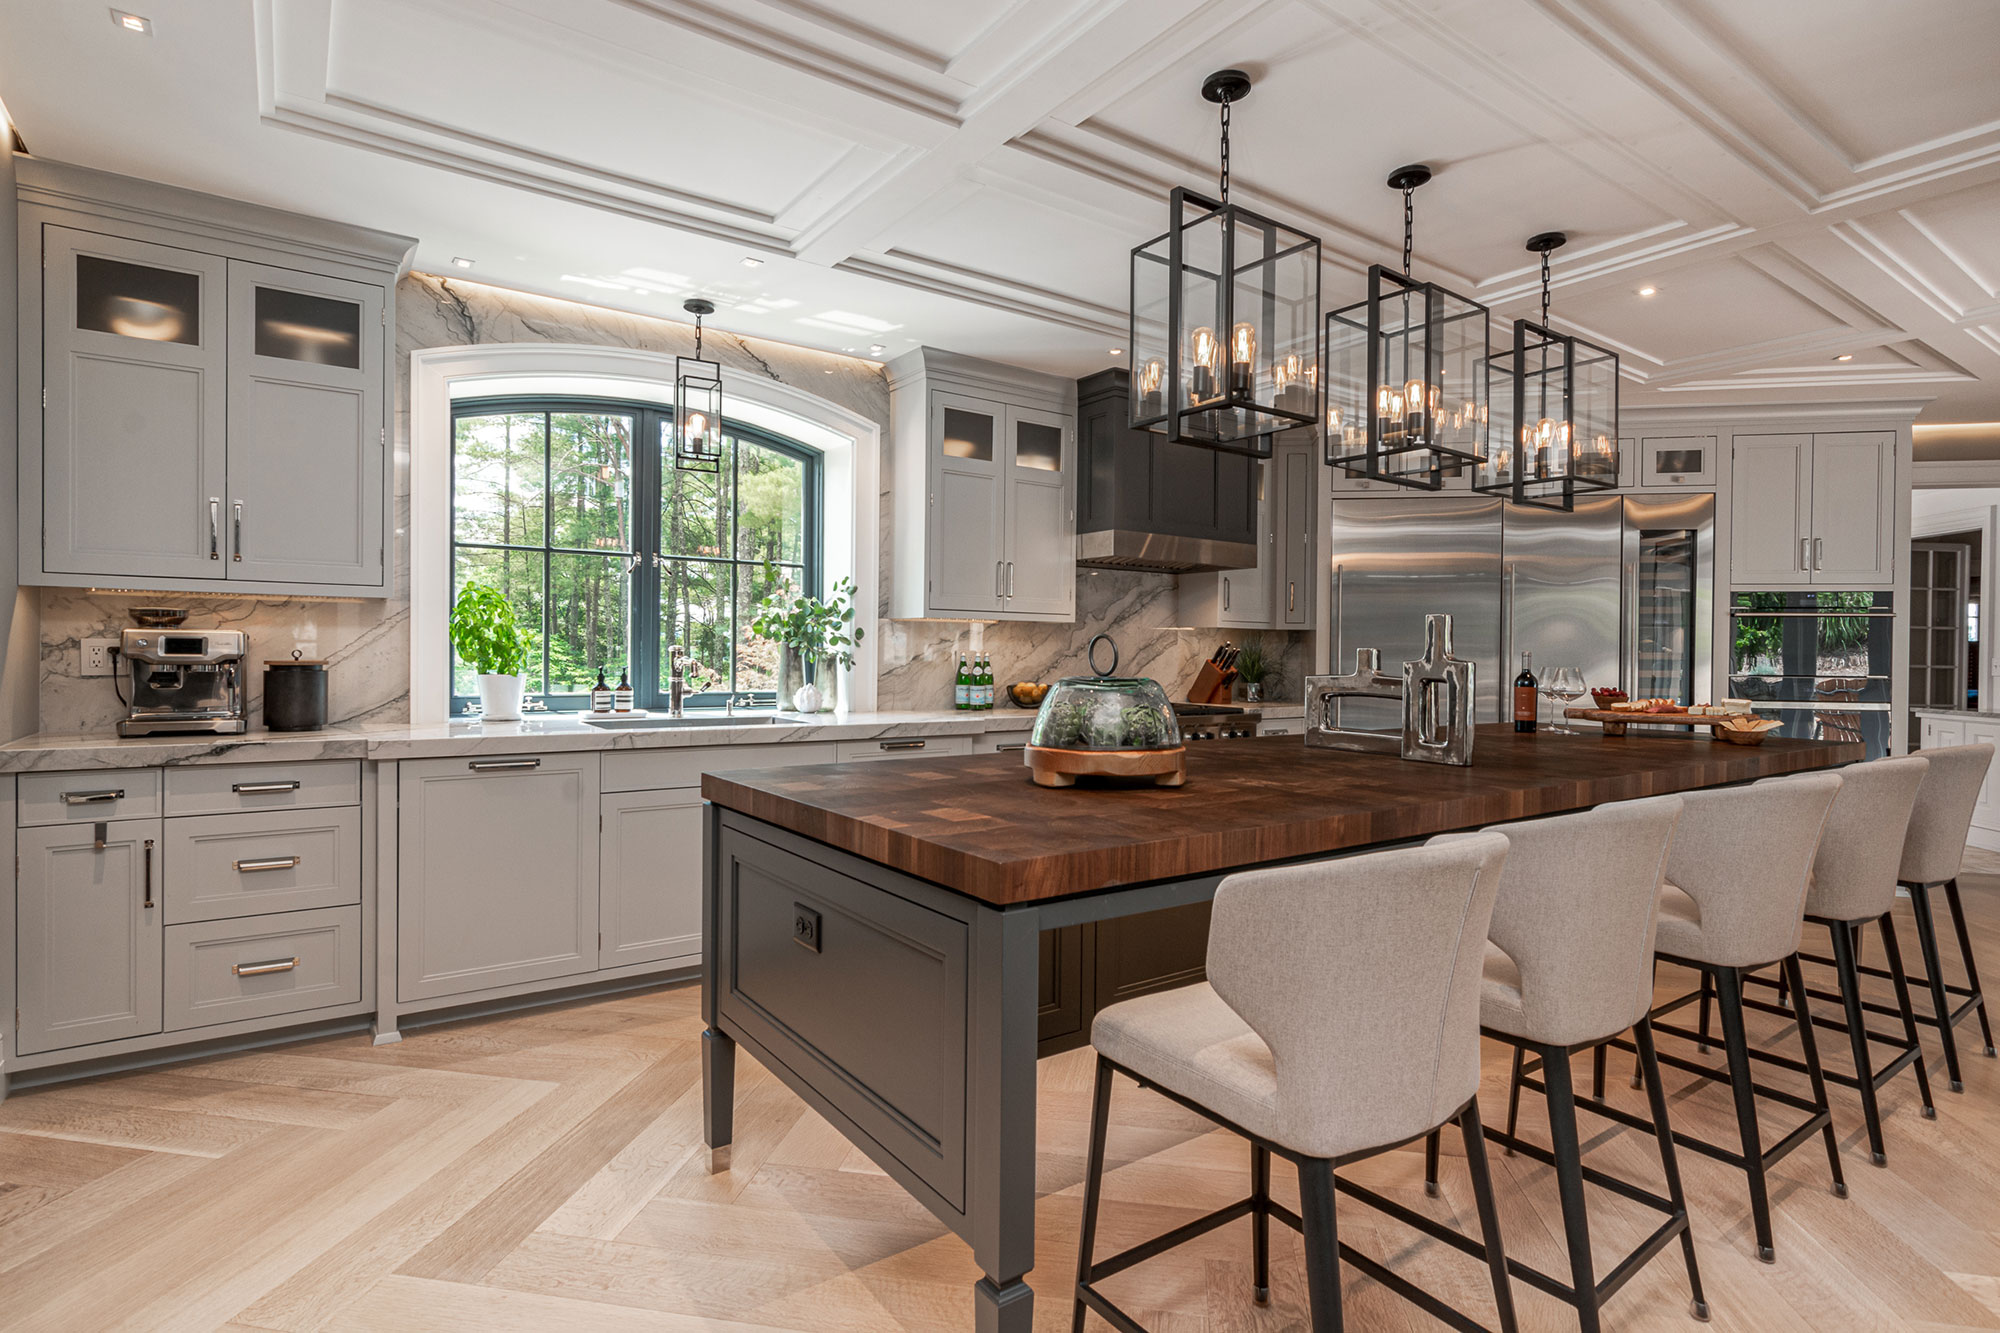 Governor's Mansion Kitchen Remodel by Stratton Design Group